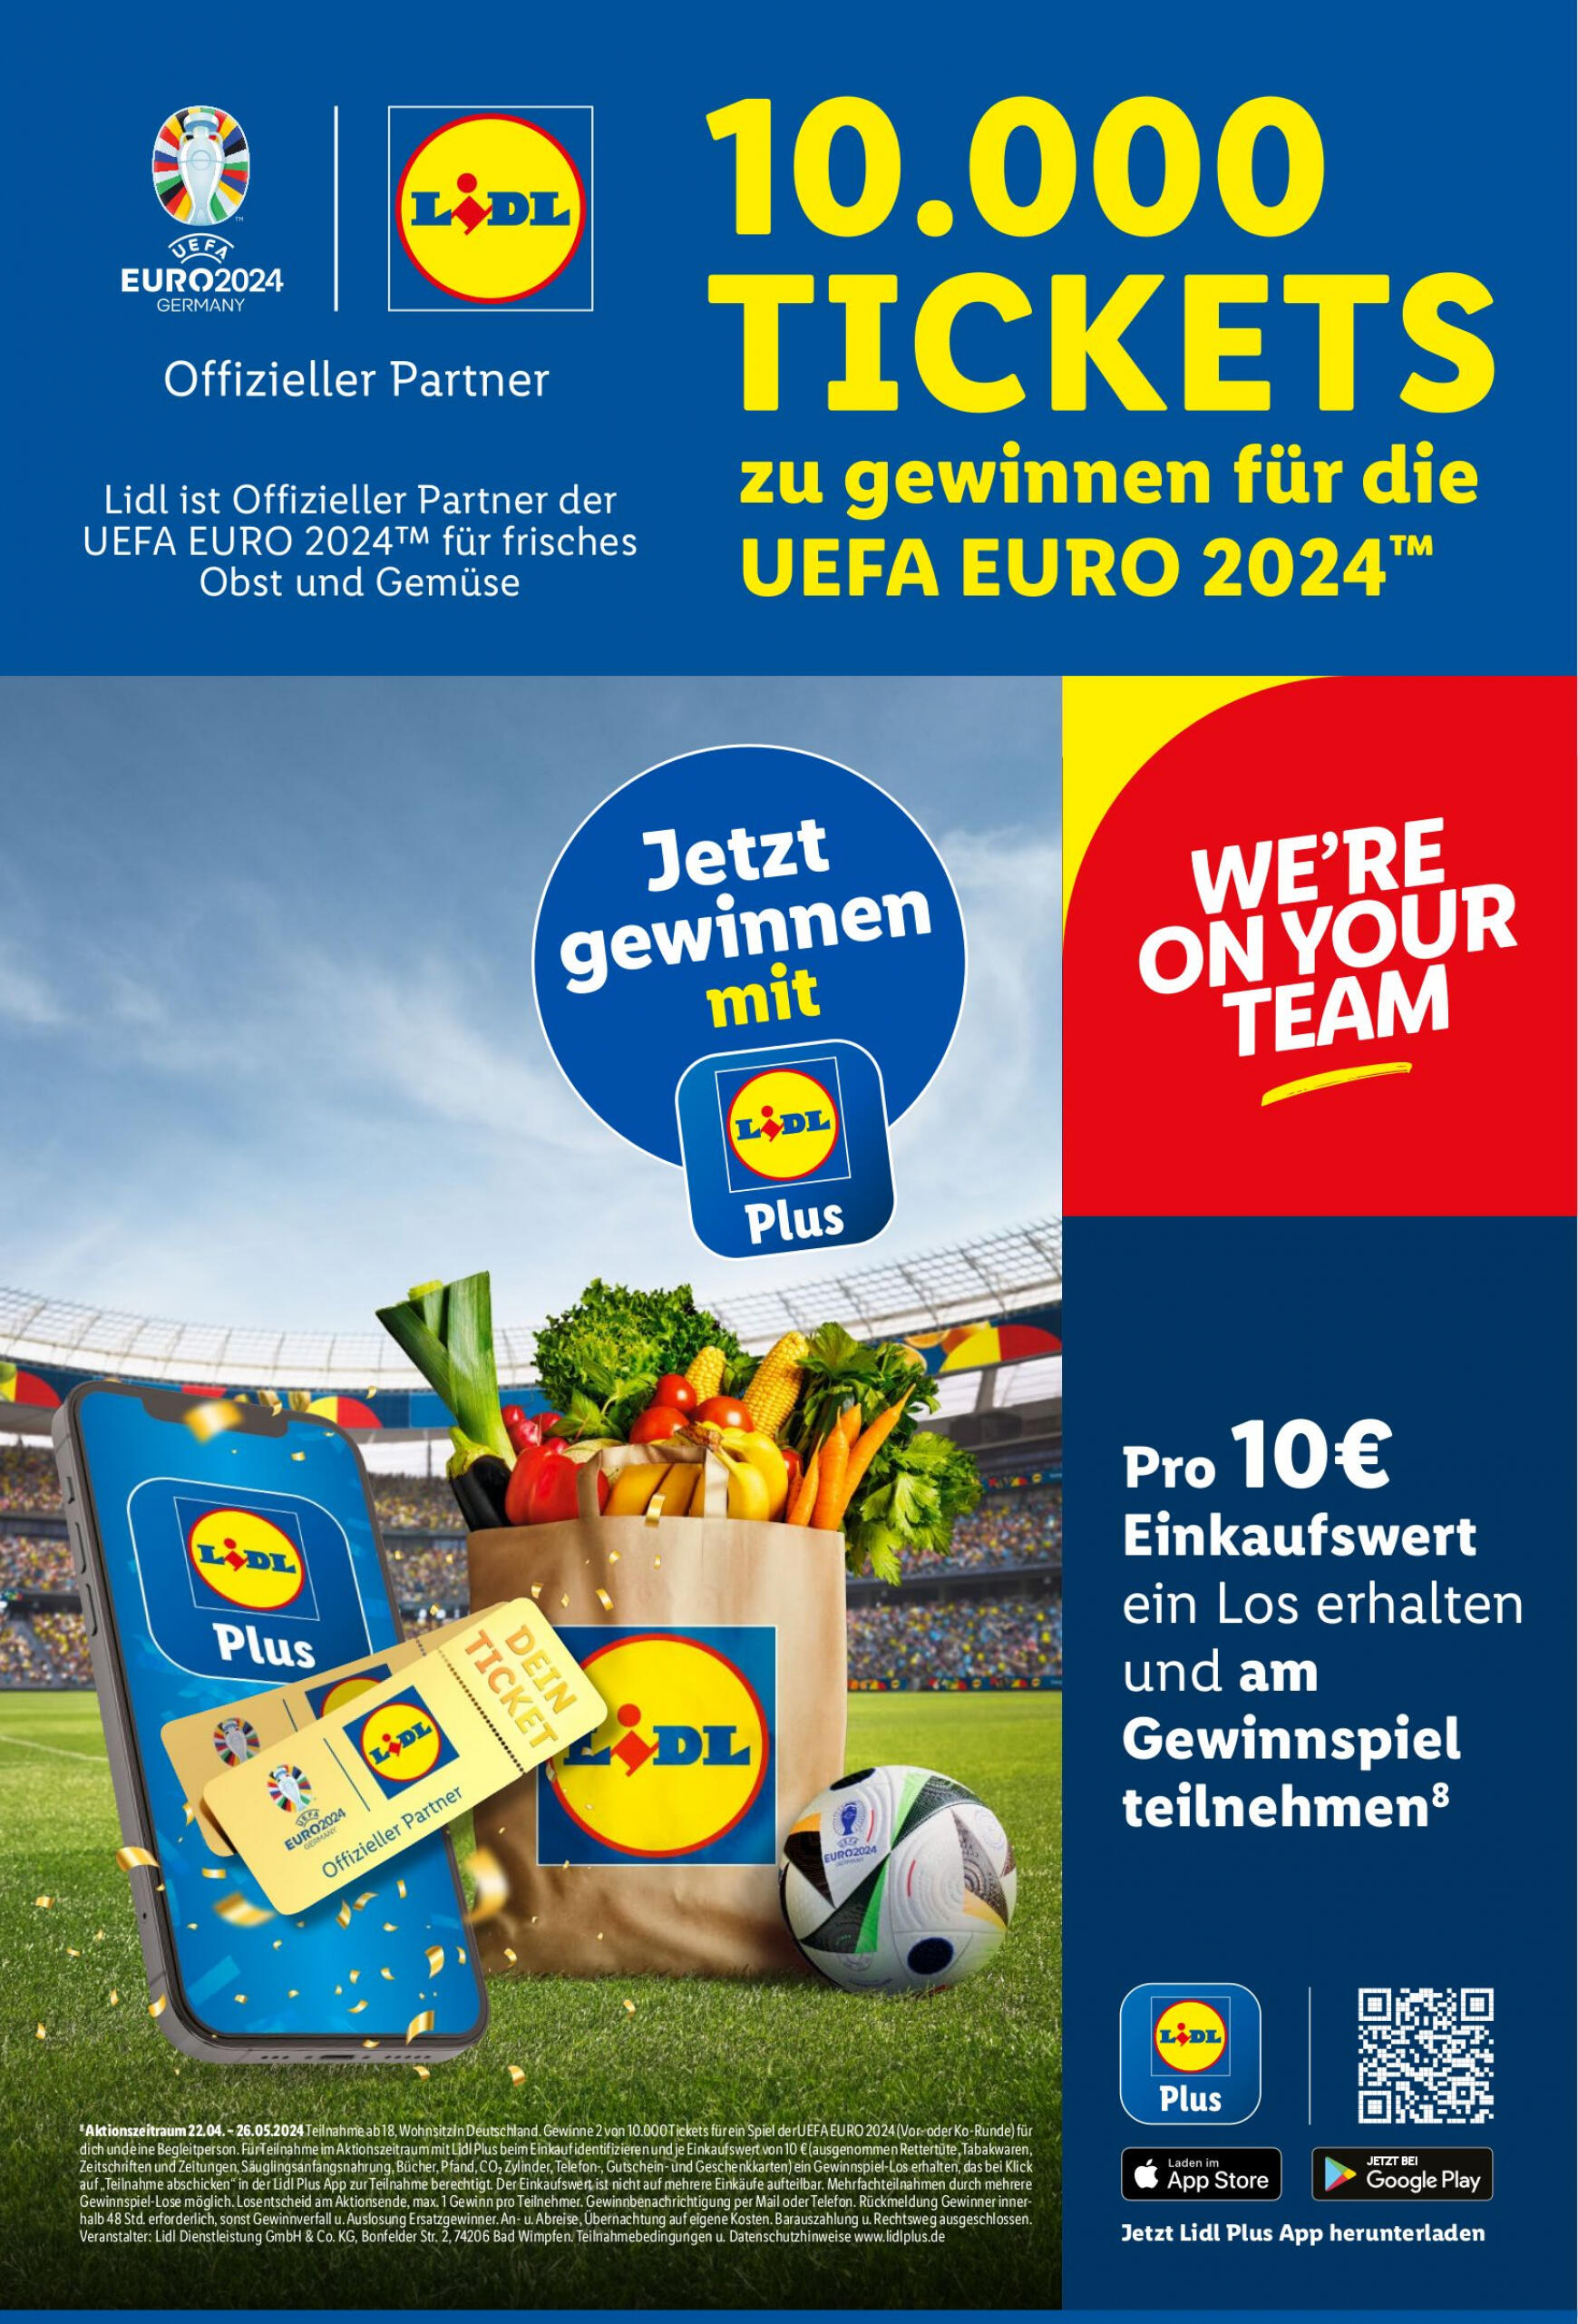 lidl - Flyer Lidl - Grillmagazin aktuell 22.04. - 30.06. - page: 26